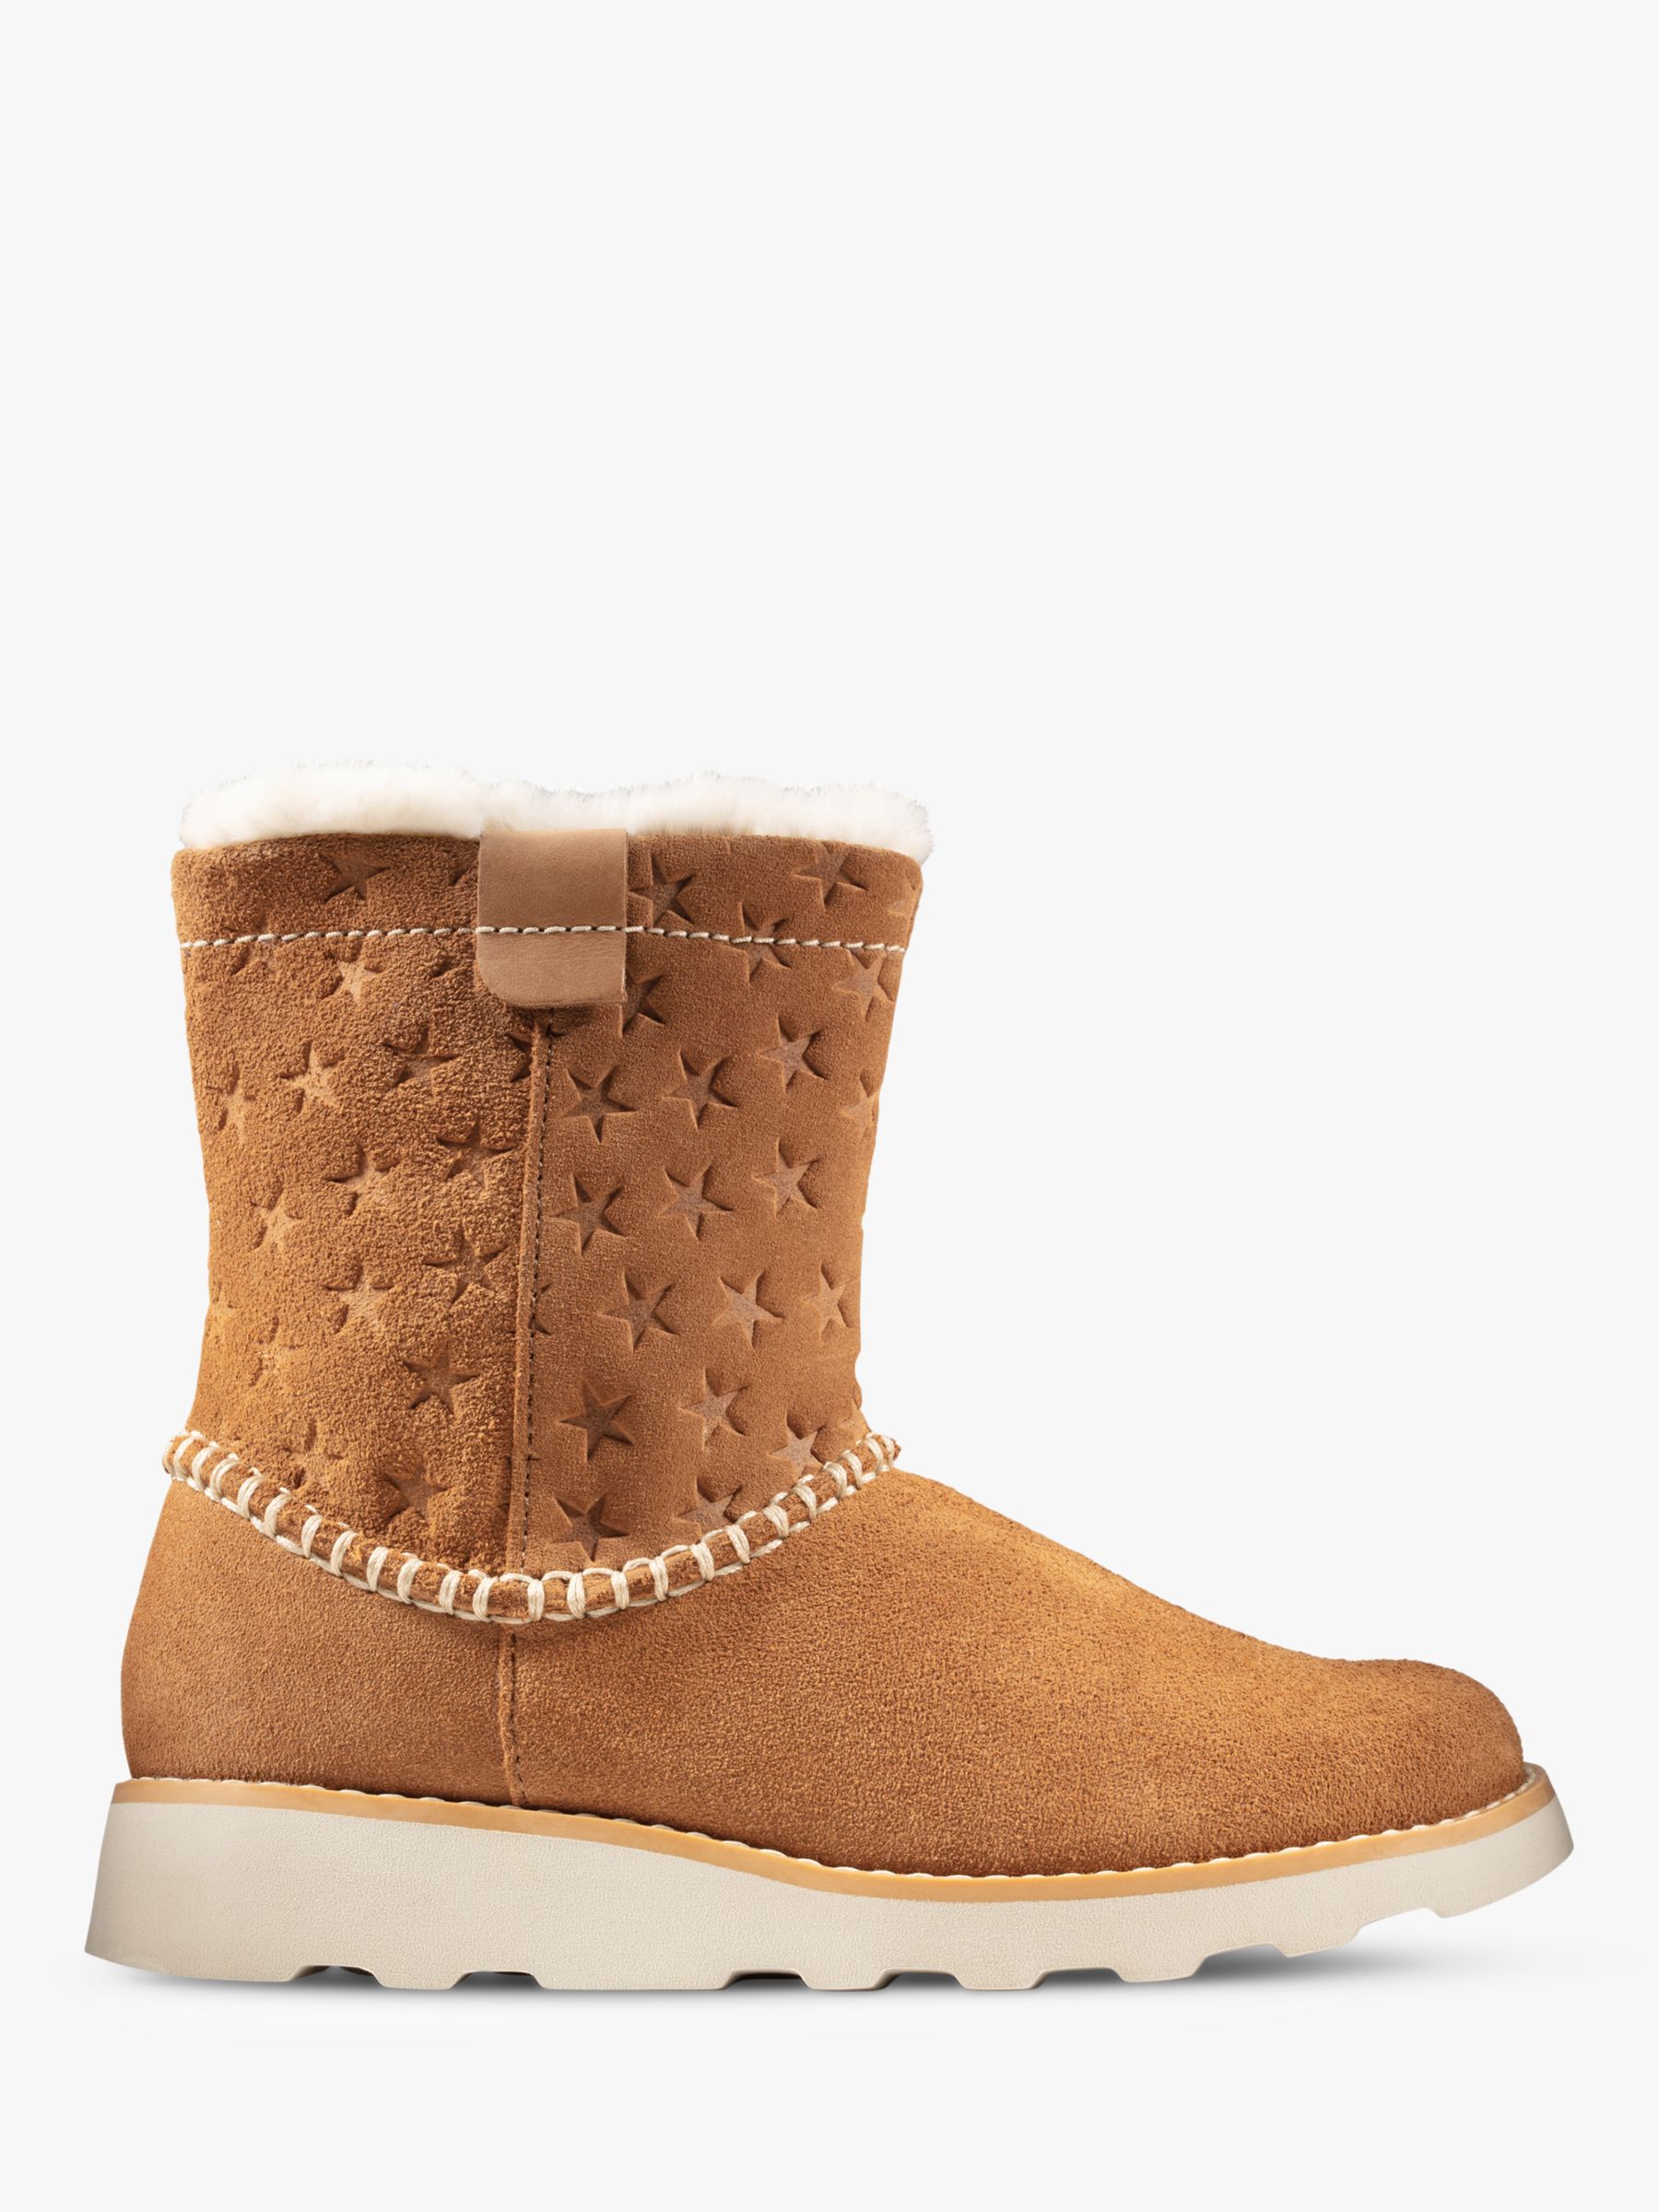 clarks crown piper boots